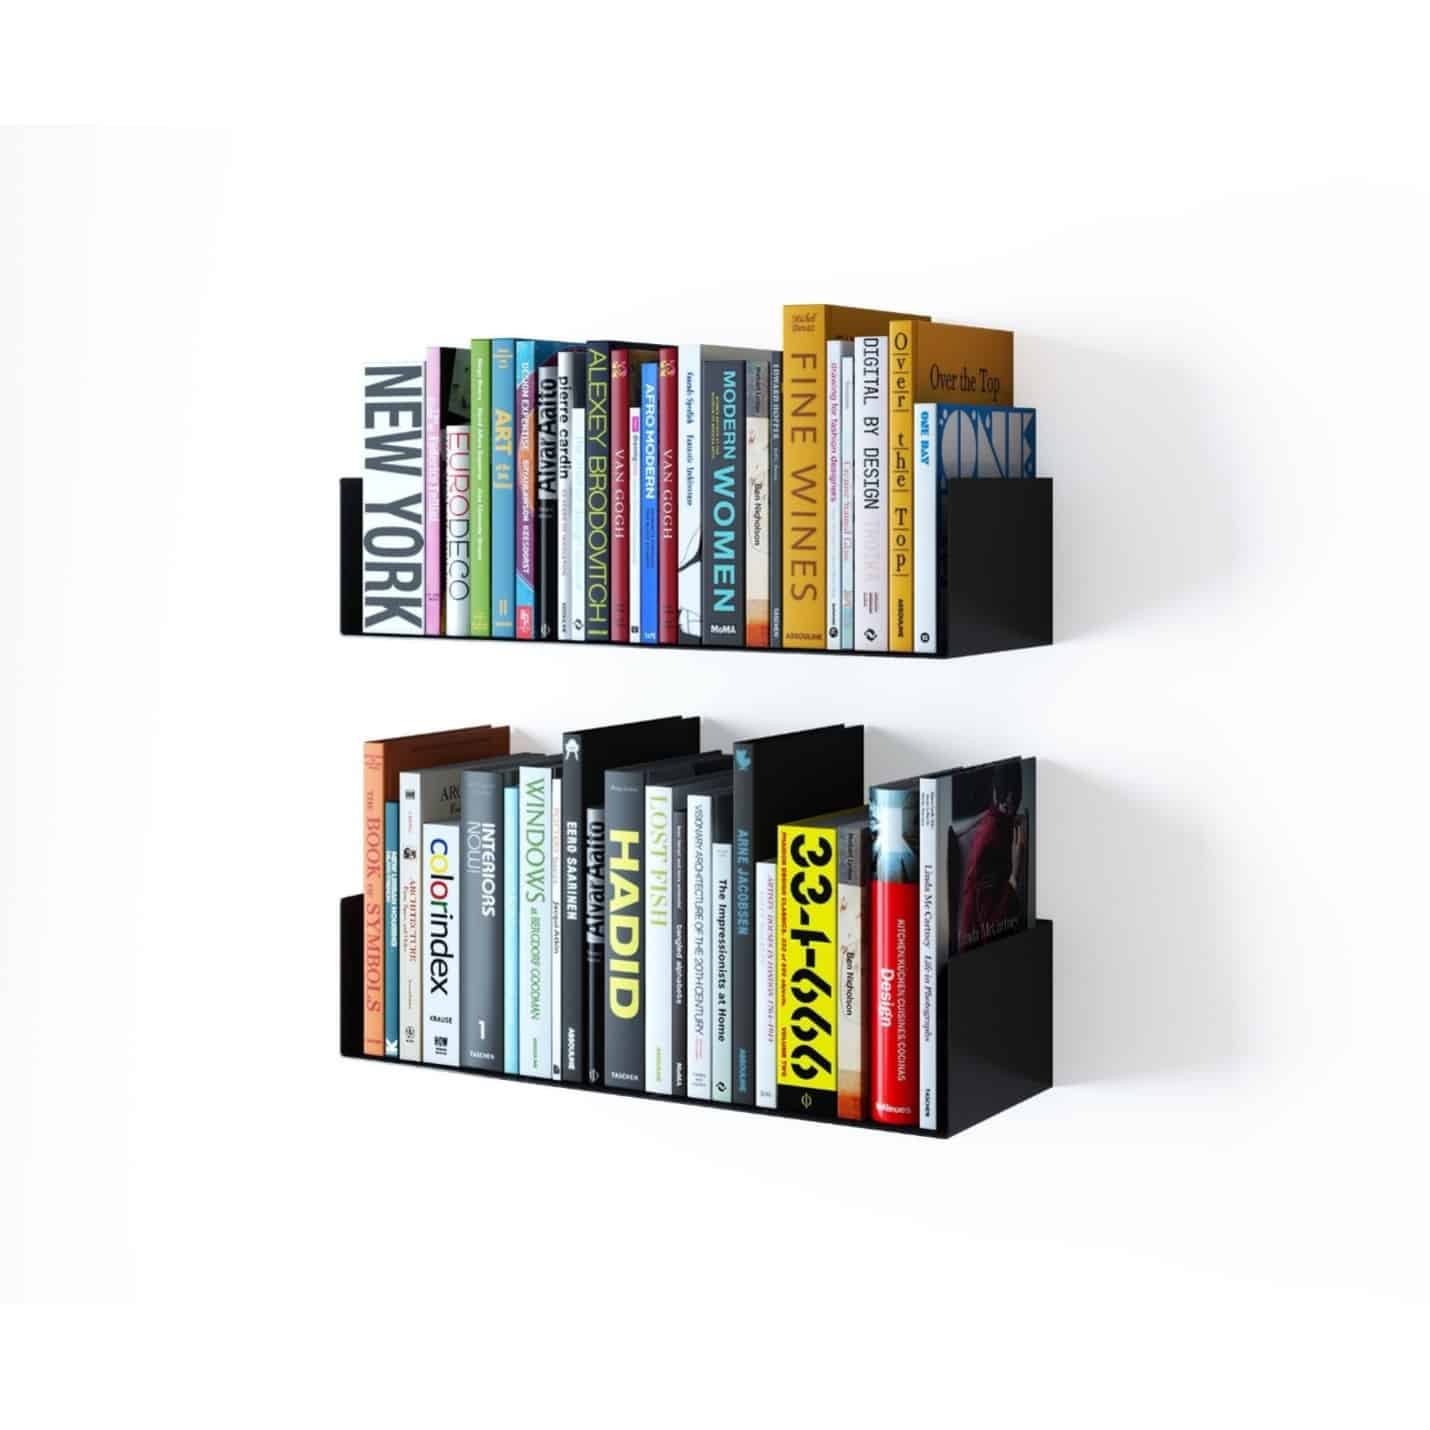 Install Floating Shelves To Store Your Cookbooks